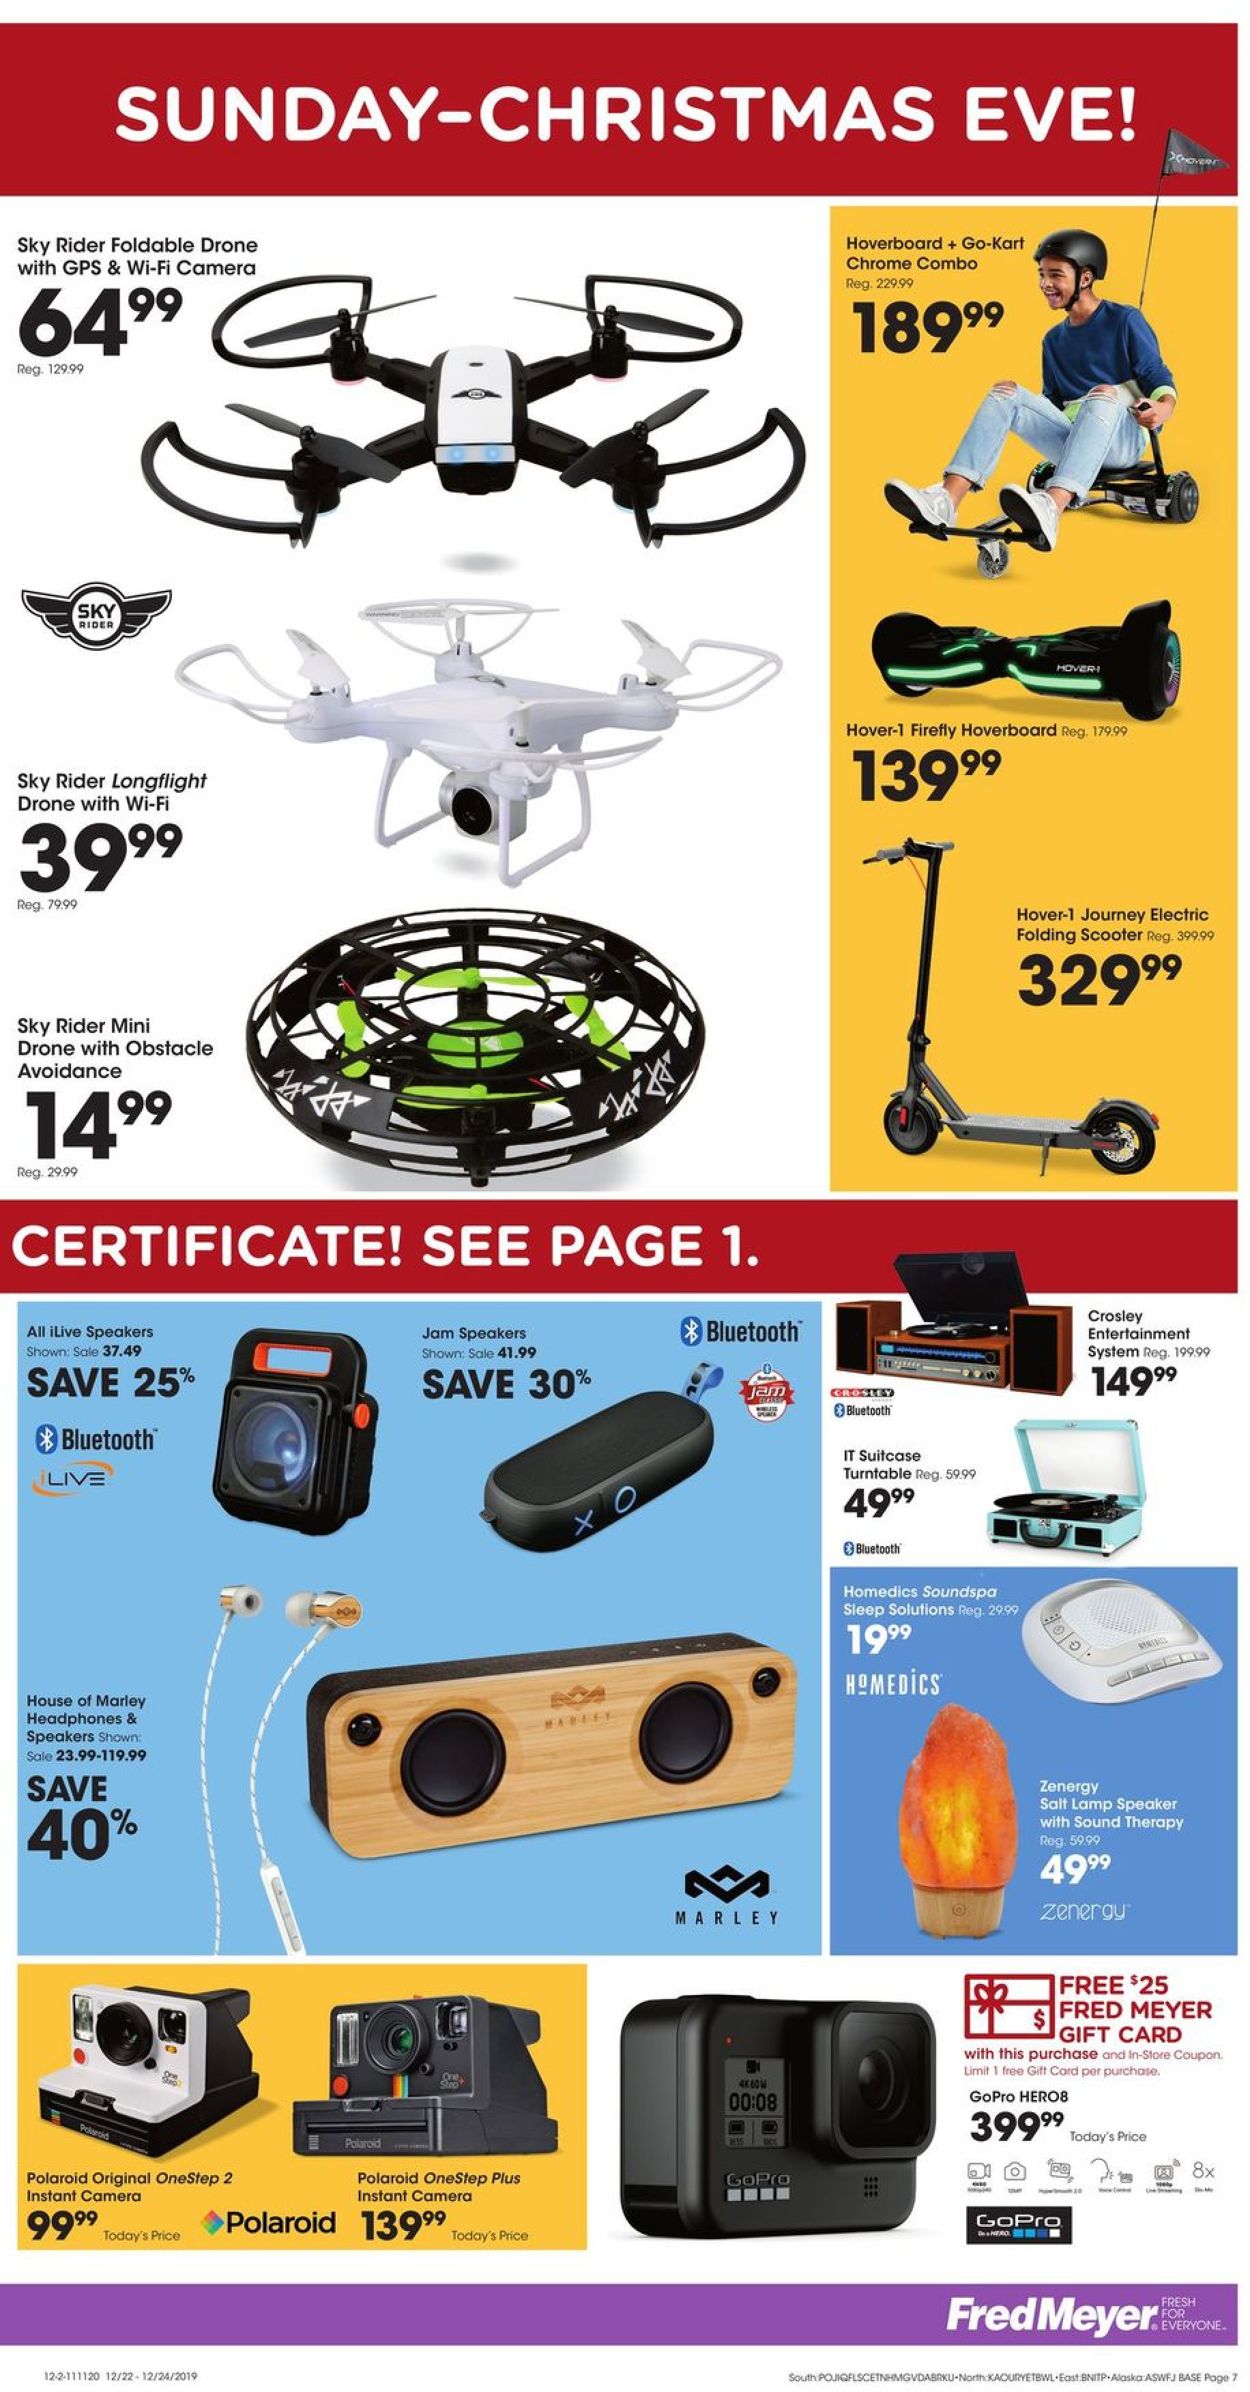 Fred Meyer - Christmas Sale Ad 2019 Weekly Ad Circular - valid 12/22-12/24/2019 (Page 7)